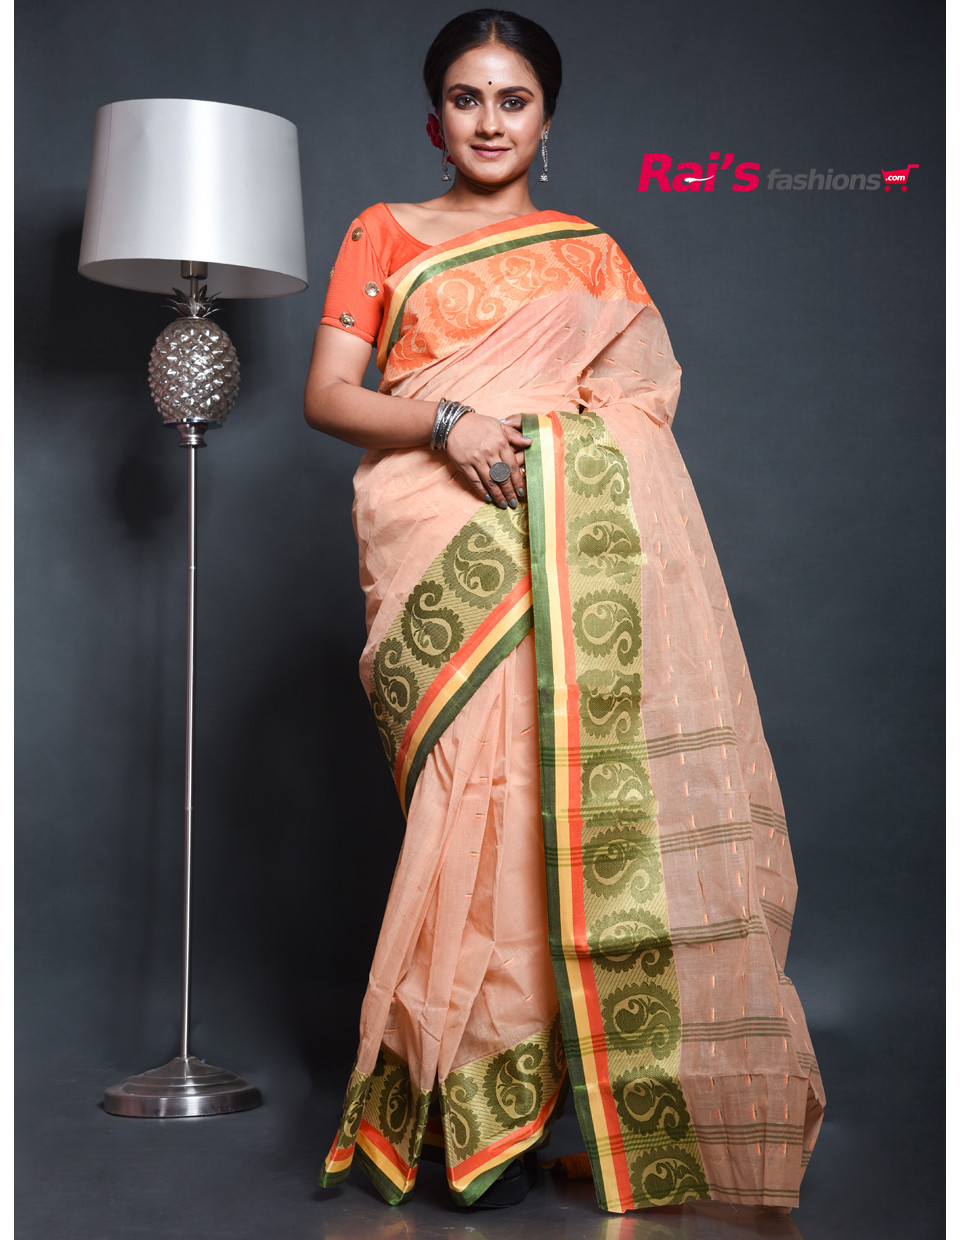 Rajsi~Handloom Cotton Tant Saree With Geometrical Designs and Red Bord –  verymuchindian.com